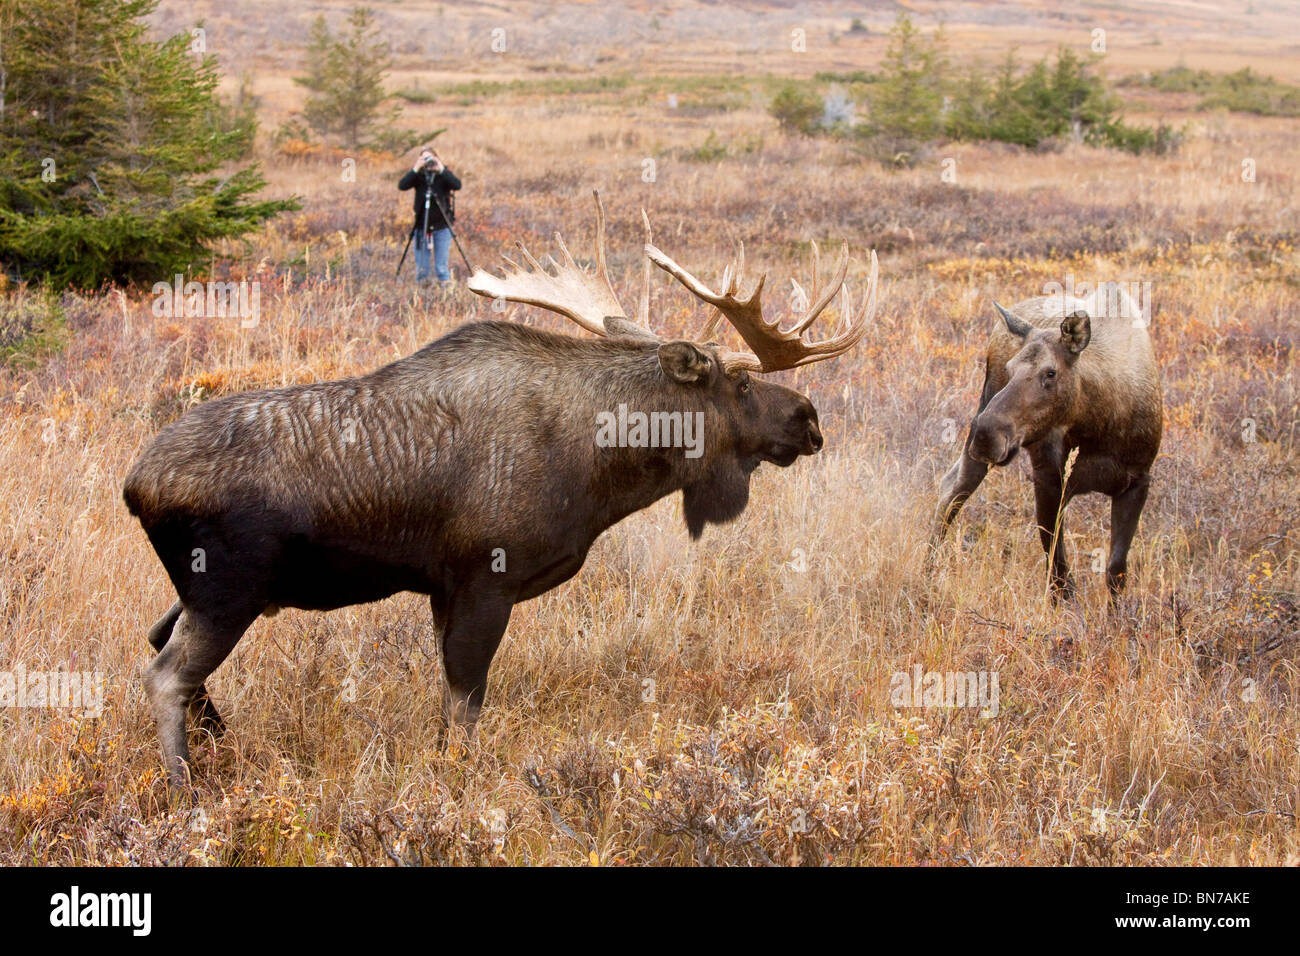 Person photographs a large bull moose approaching a cow moose during the rut at Powerline Pass near Anchorage in Alaska Stock Photo